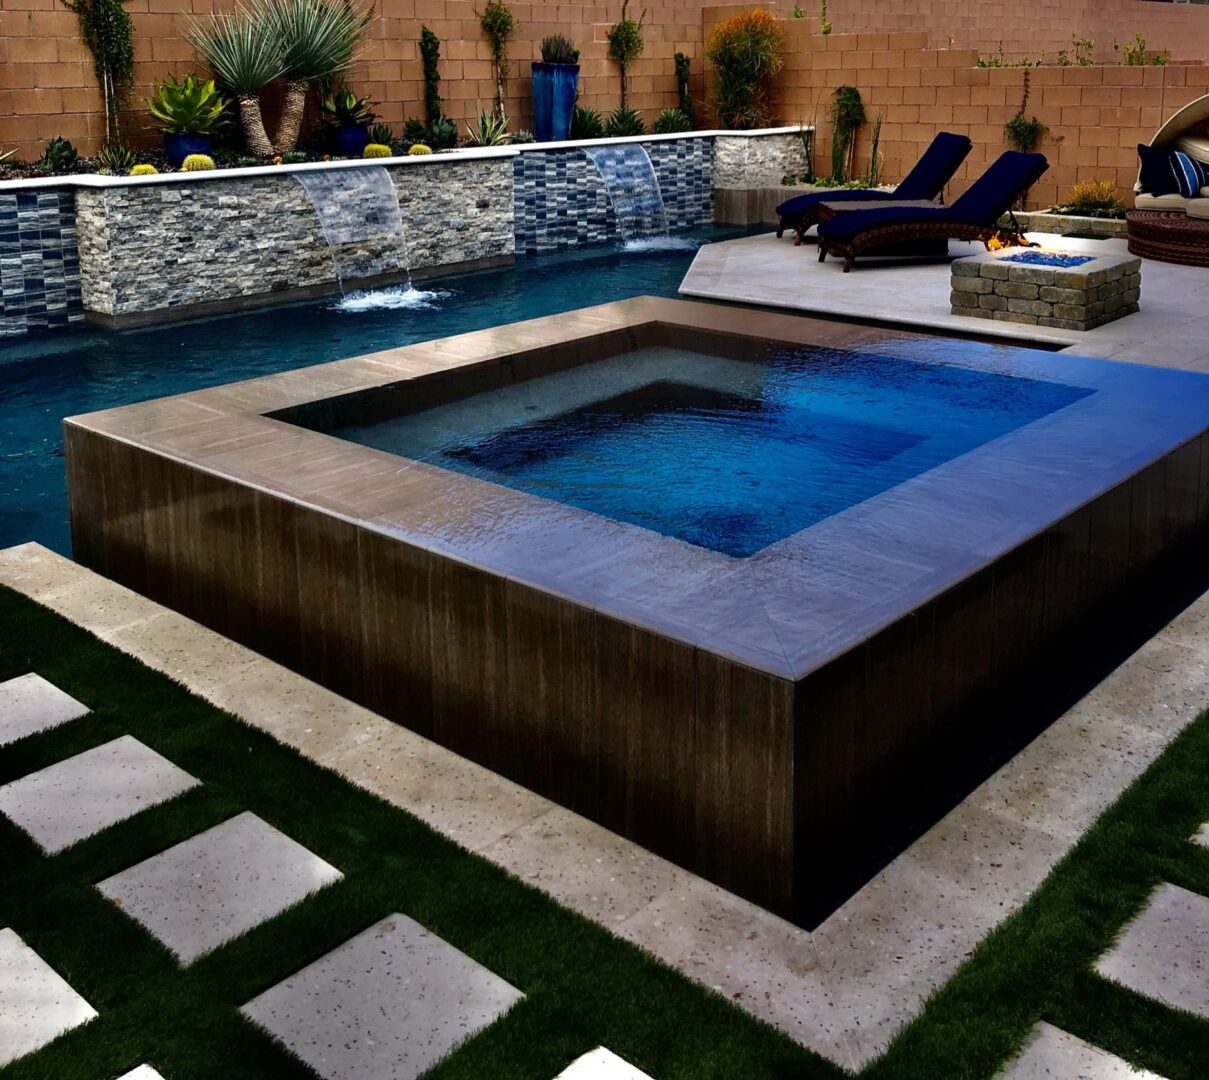 A pool with a large square shaped hot tub.